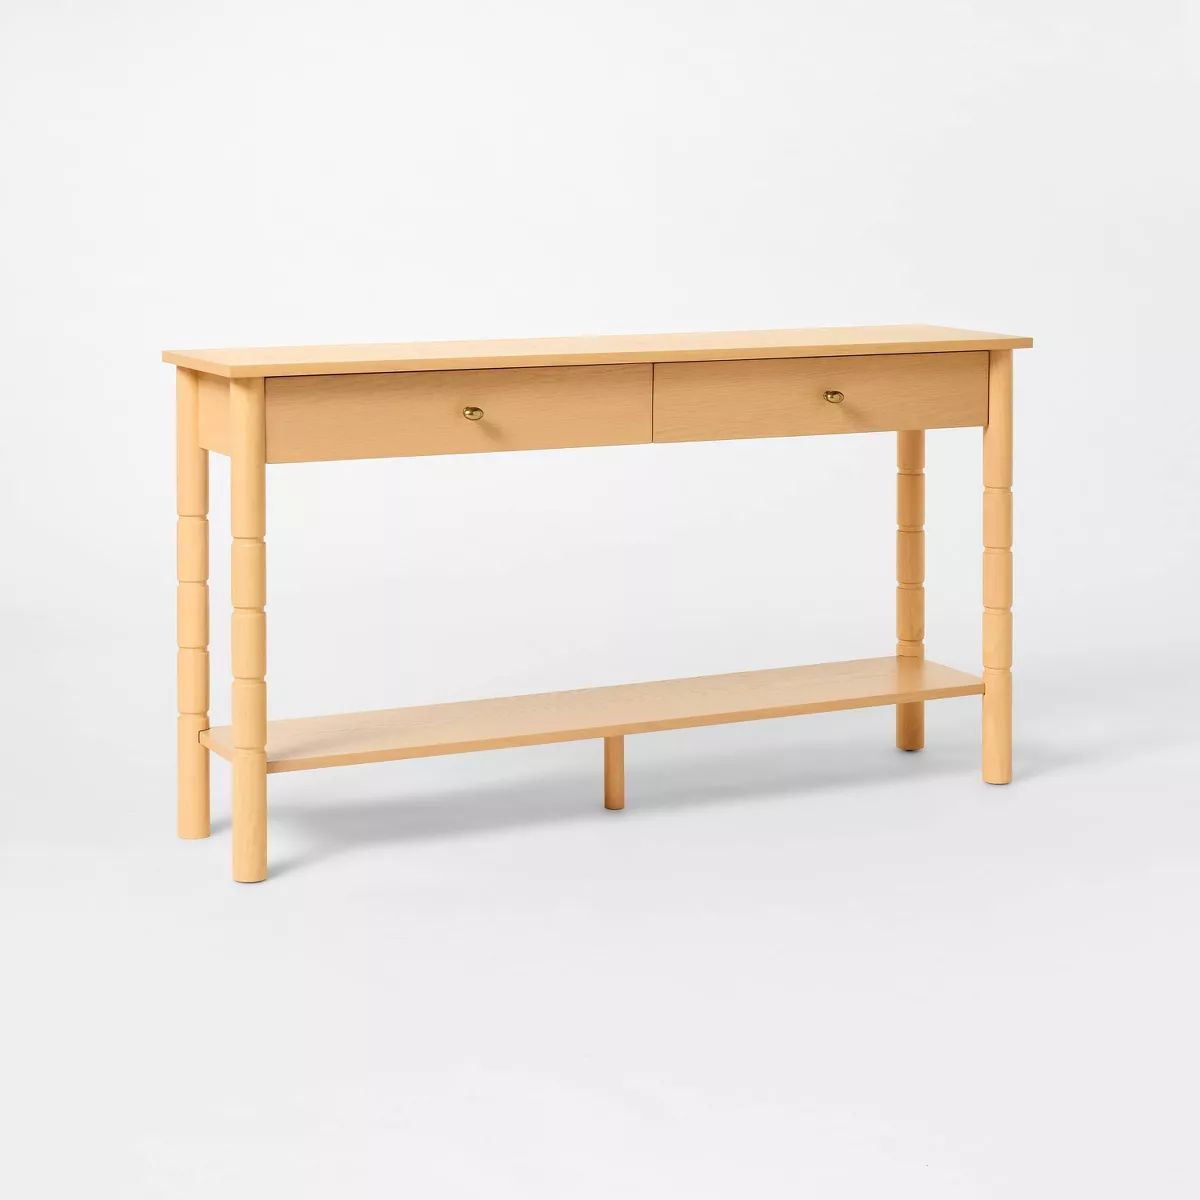 60" Modern Wooden Console Table with Drawer Brown - Threshold™ designed with Studio McGee | Target